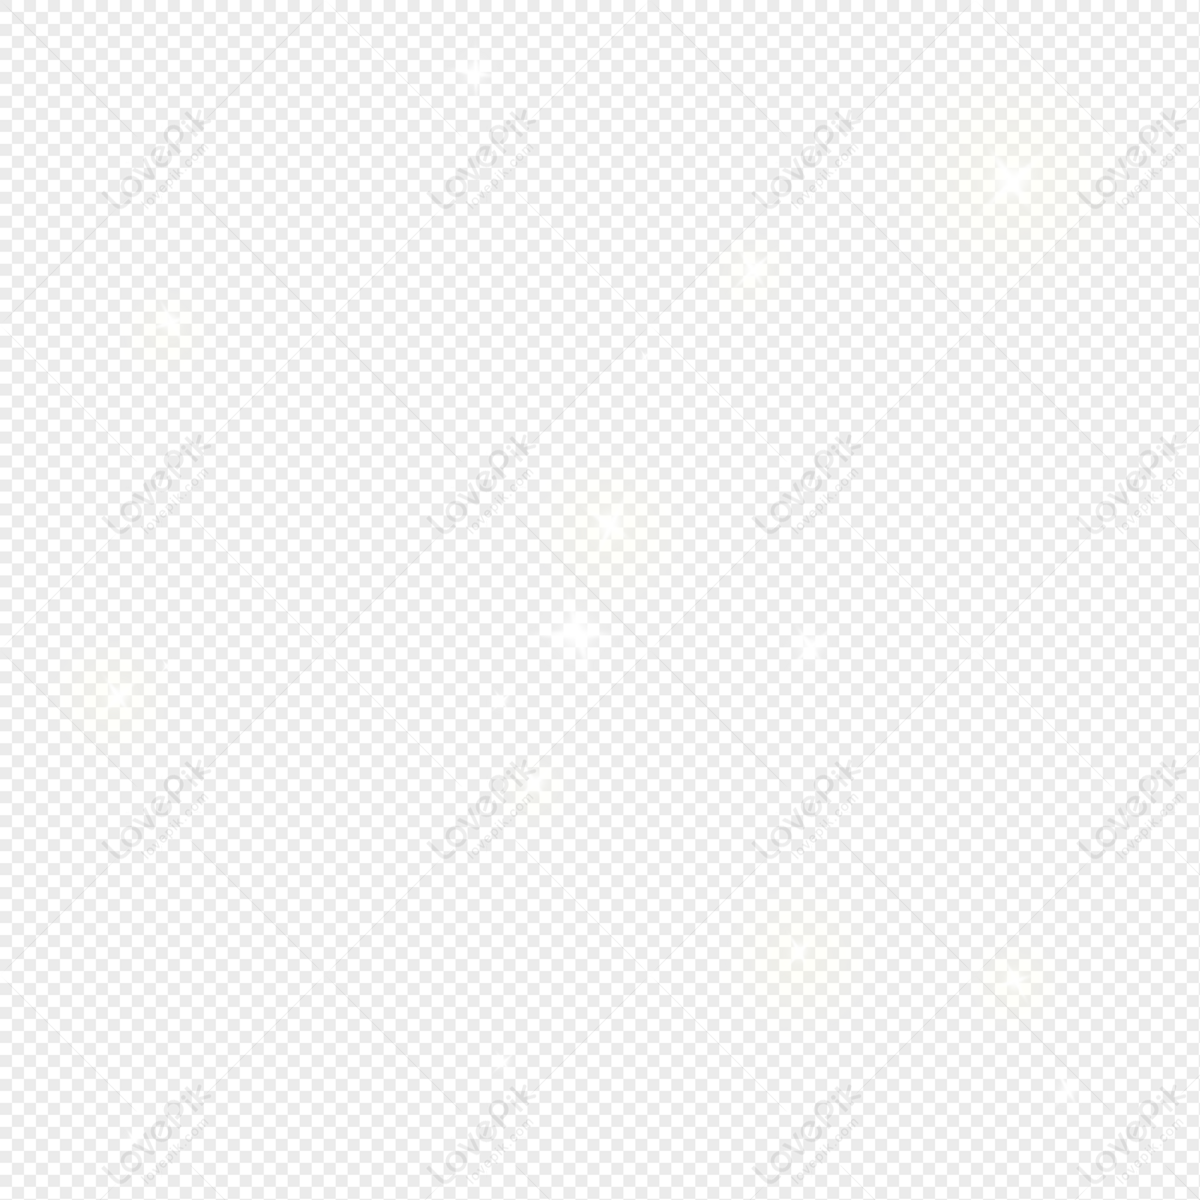 White Stars PNG Transparent Background And Clipart Image For Free Download  - Lovepik | 401484490